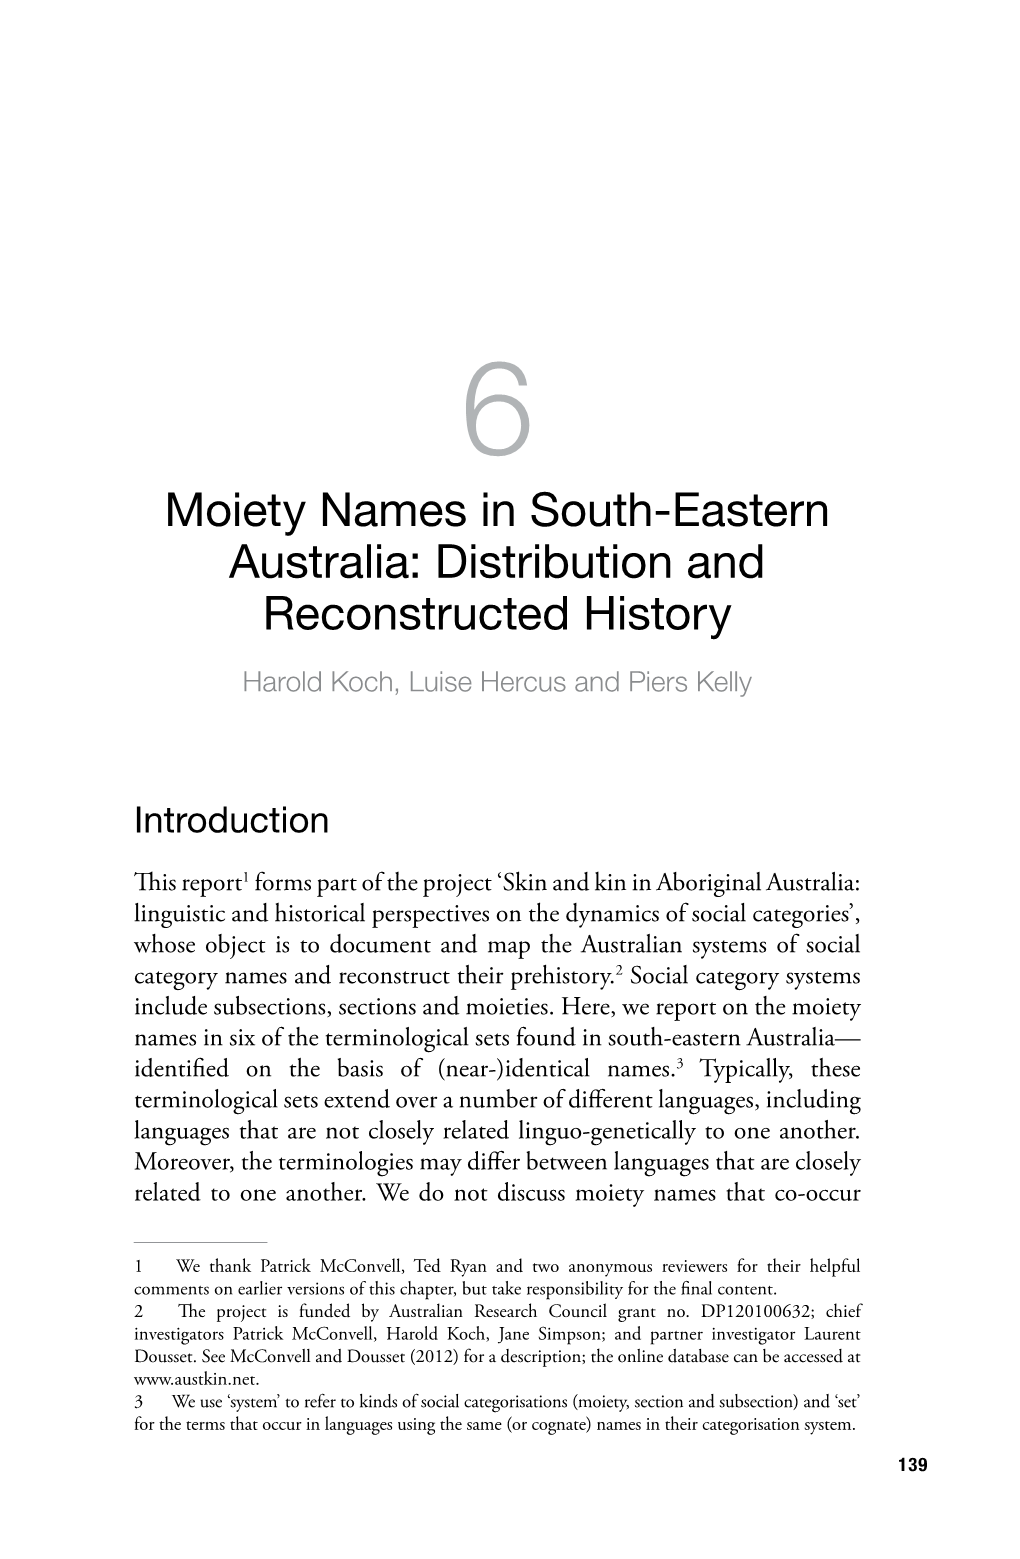 Moiety Names in South-Eastern Australia: Distribution and Reconstructed History Harold Koch, Luise Hercus and Piers Kelly